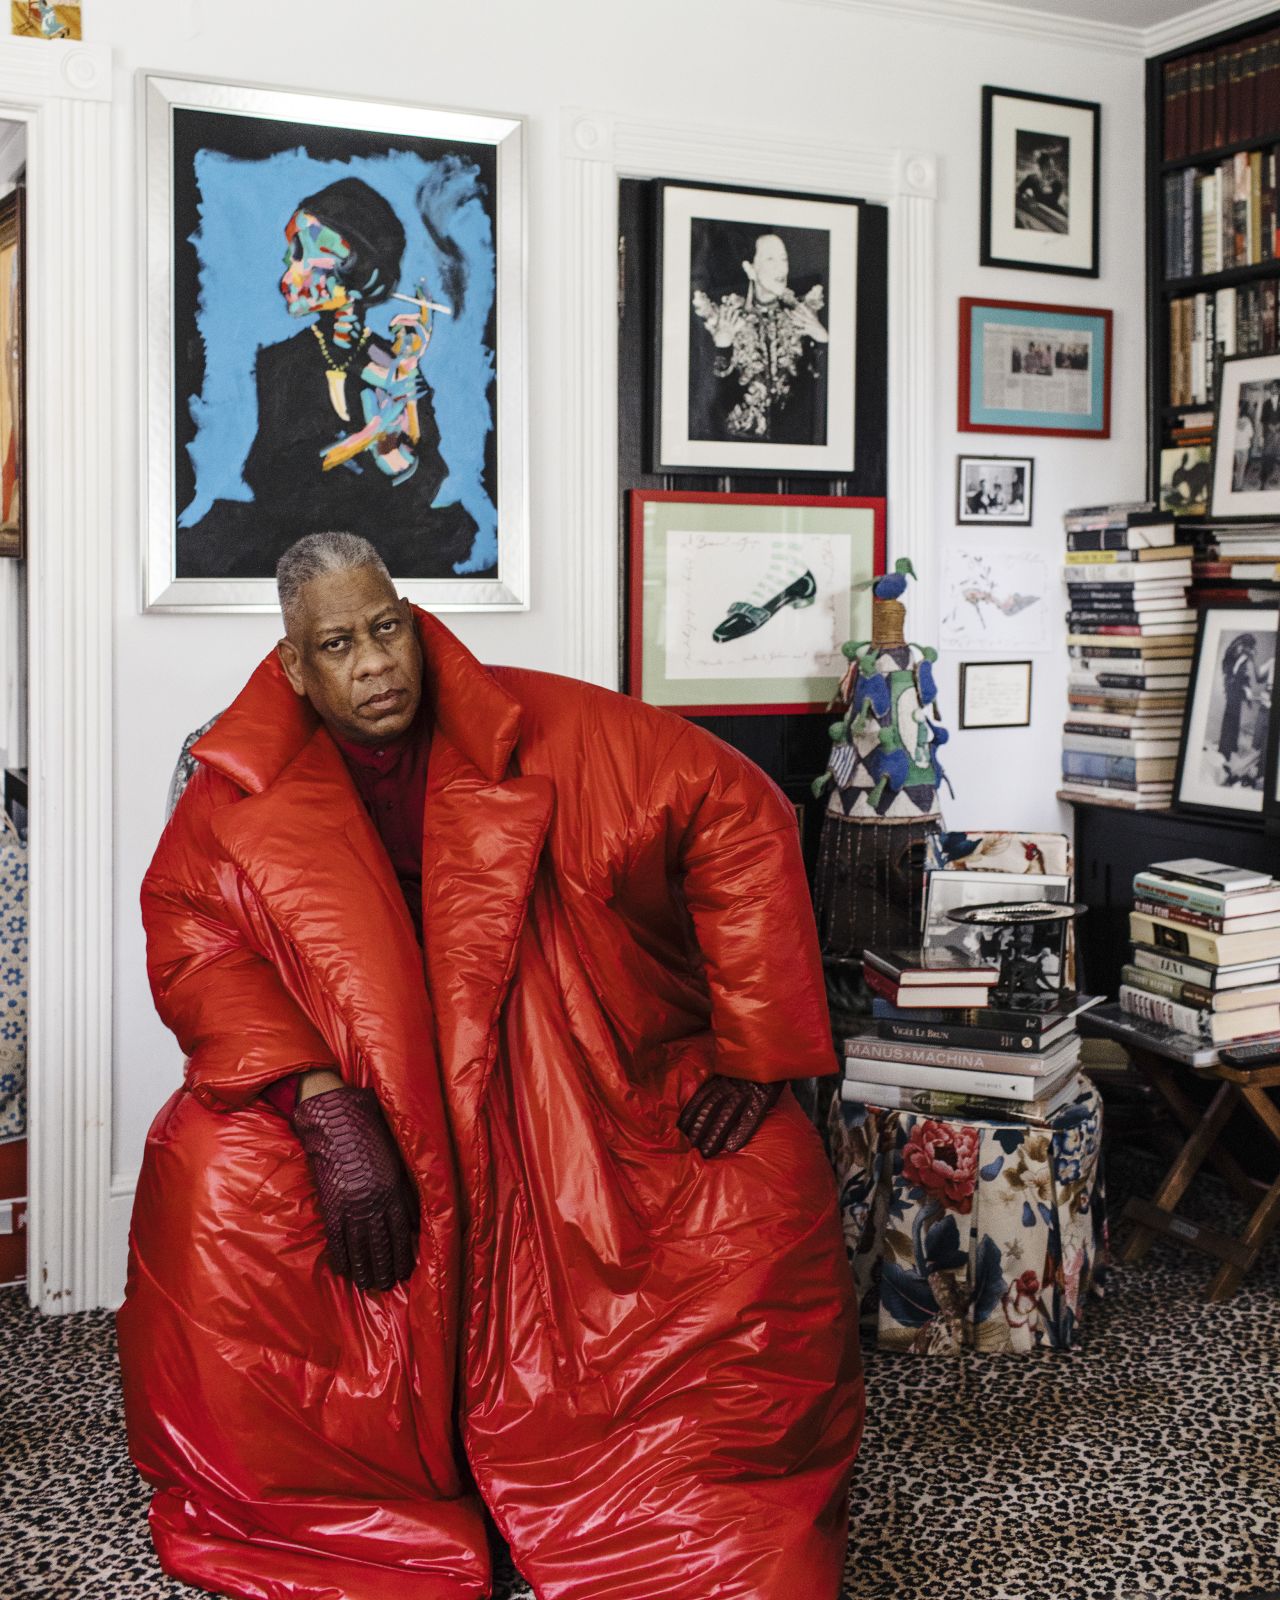 Talley's fashion legacy moved with the times. In 2016, he became known for sporting exaggerated, statement puffer jackets like this one designed by Norma Kamali.